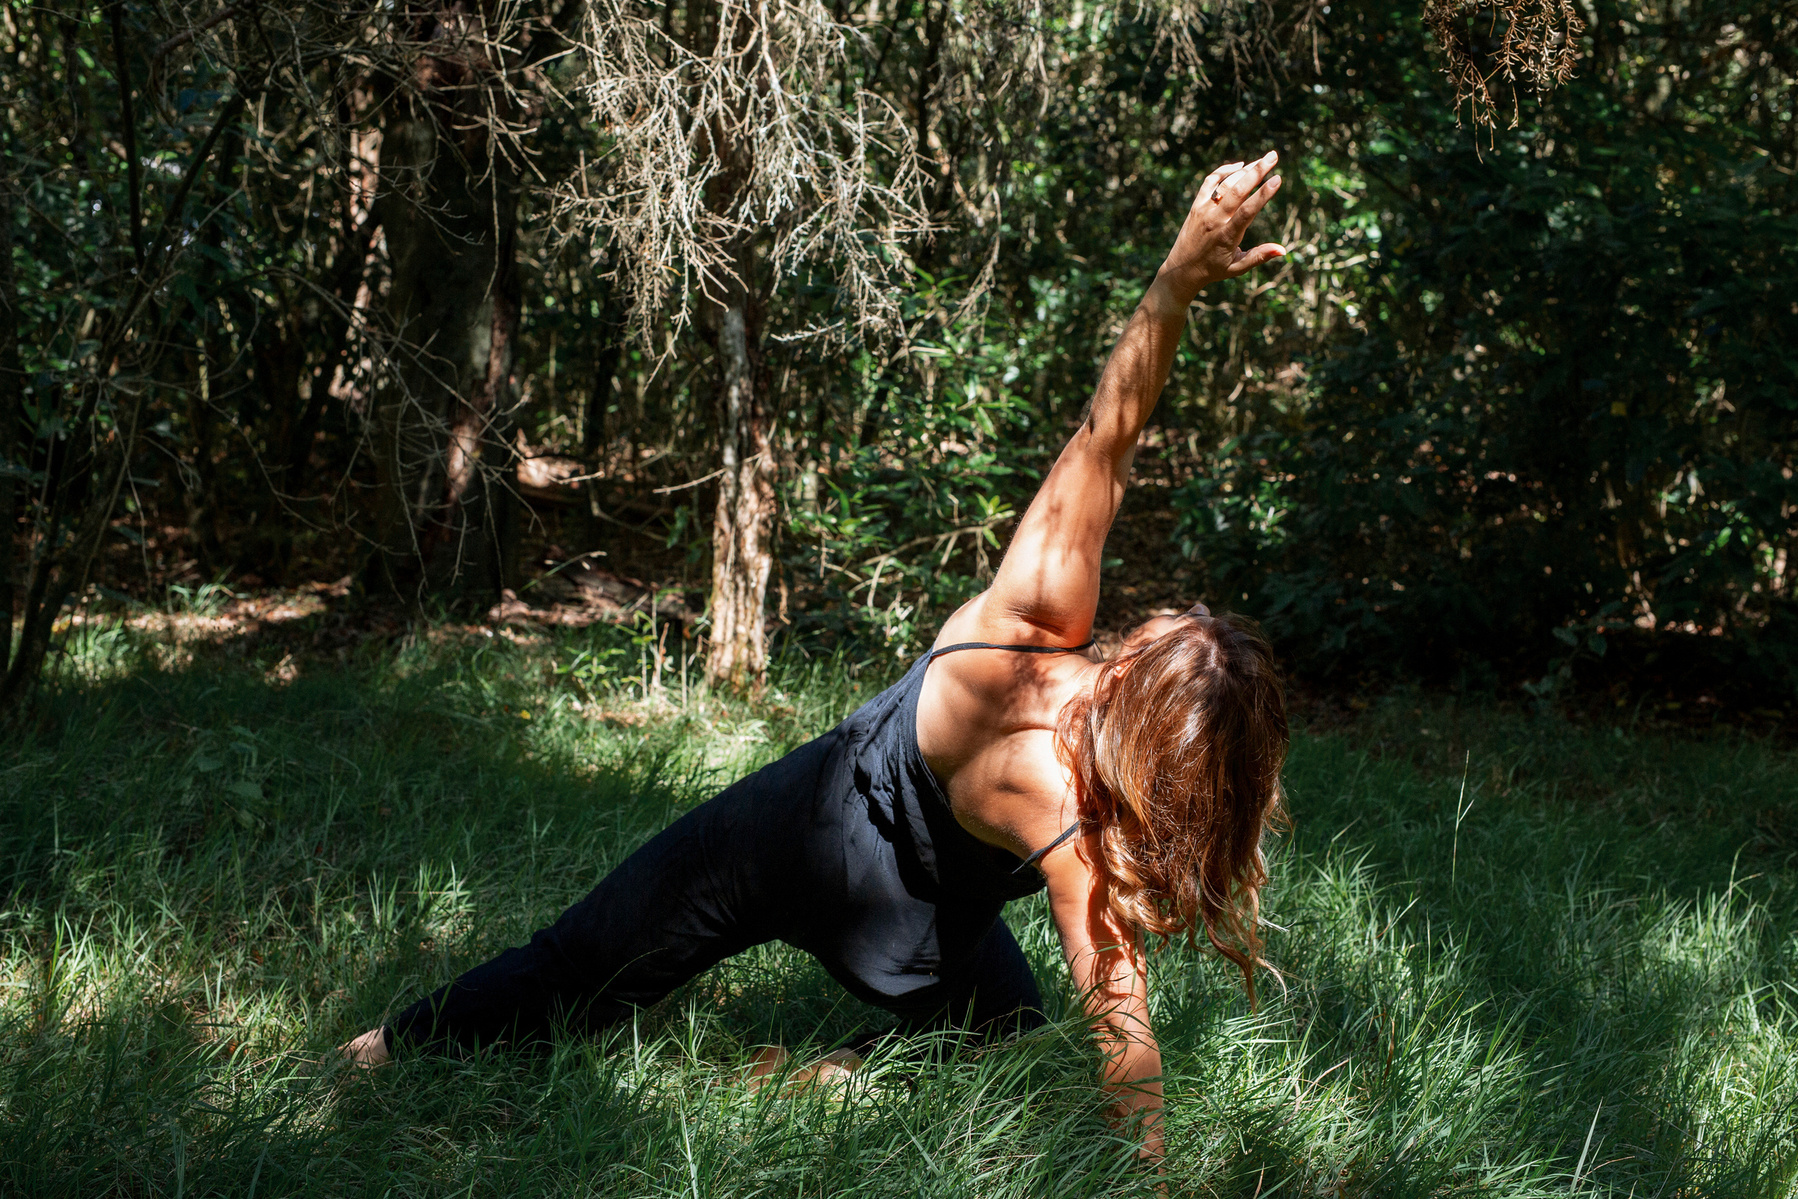 A slim woman practices yoga outside in long grass illuminated by dappled sunlight, her weight is on one knee as she stretches the other leg out and reaches an arm over her head 